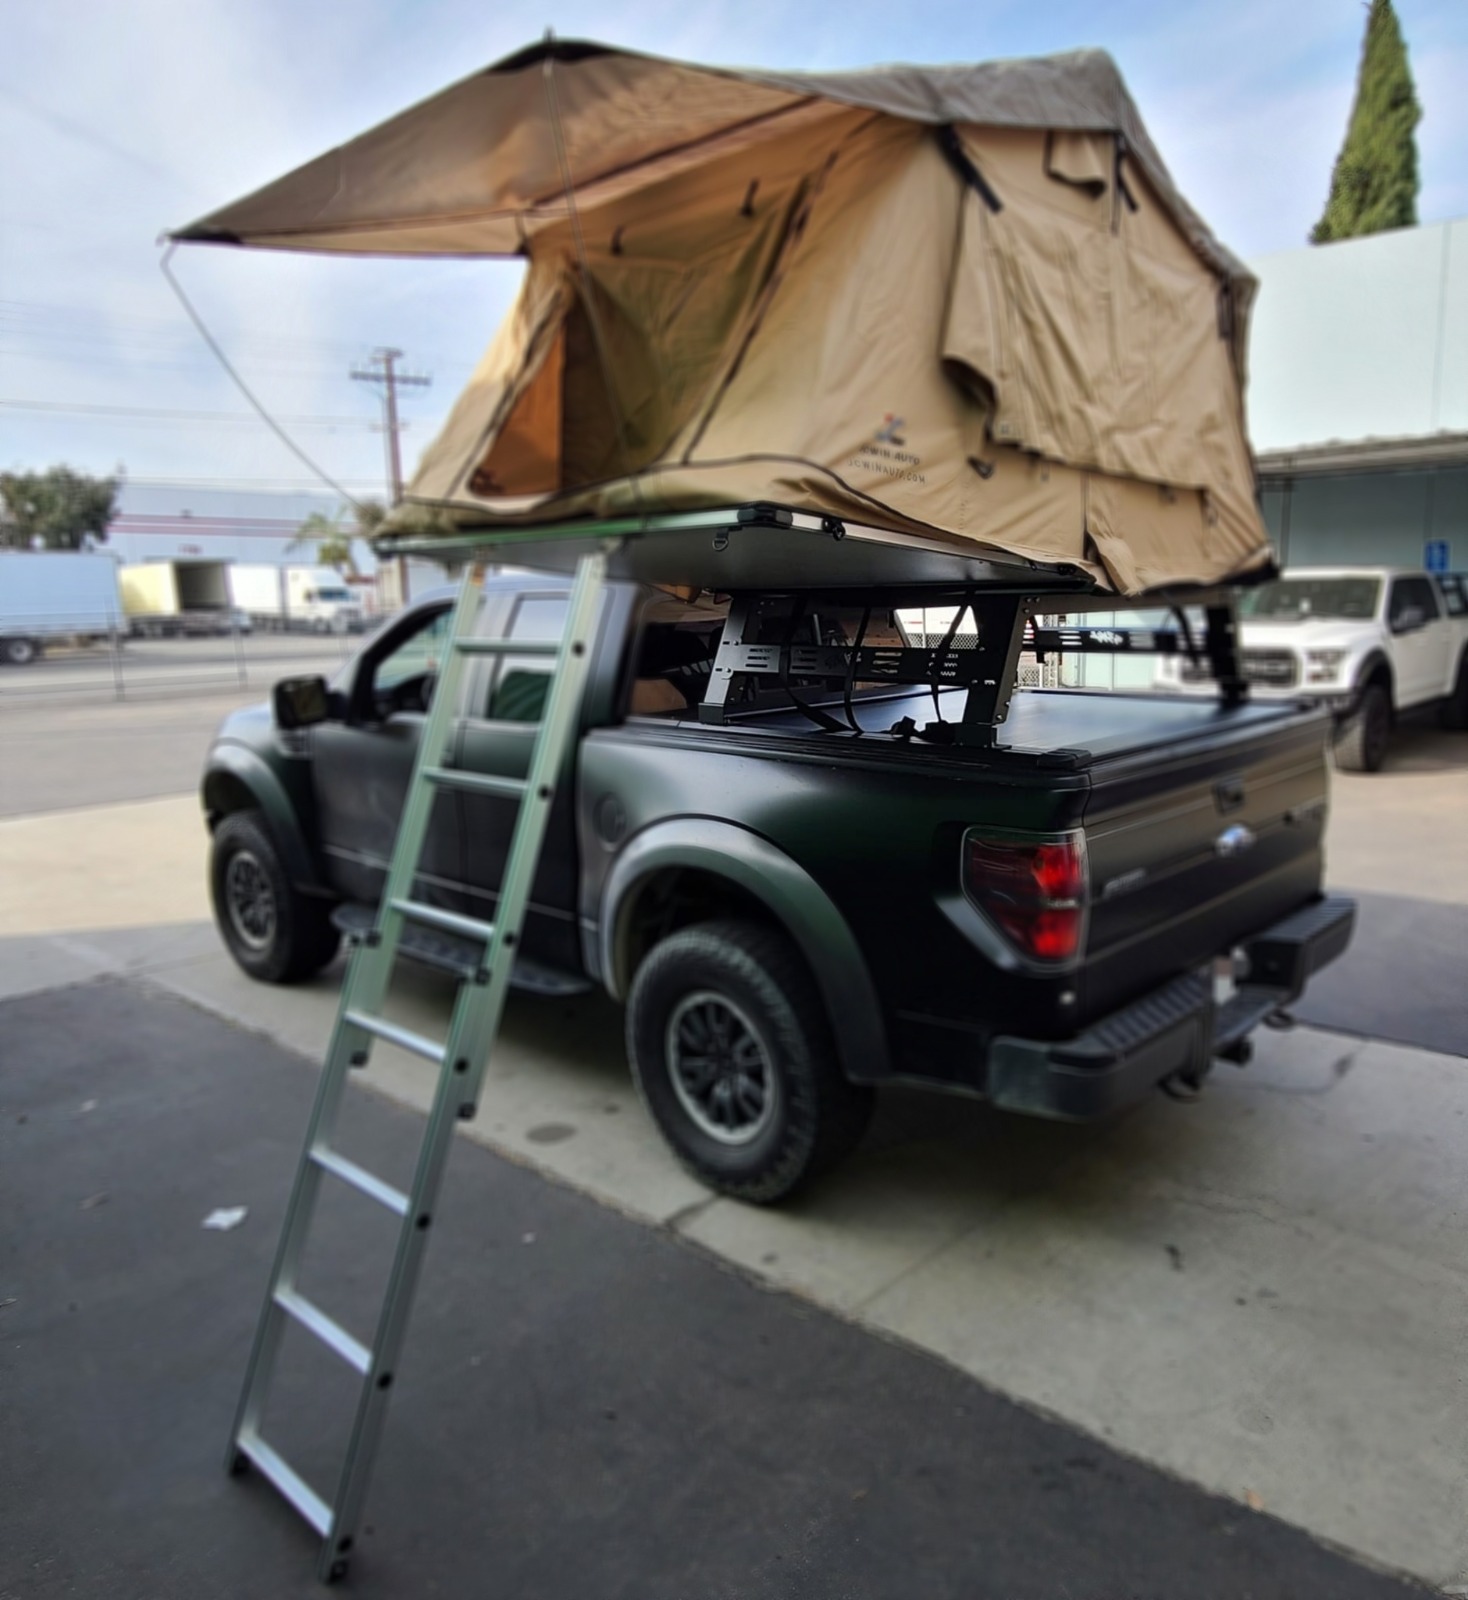 SyneticUSA's retractable cover with utility rack and tent